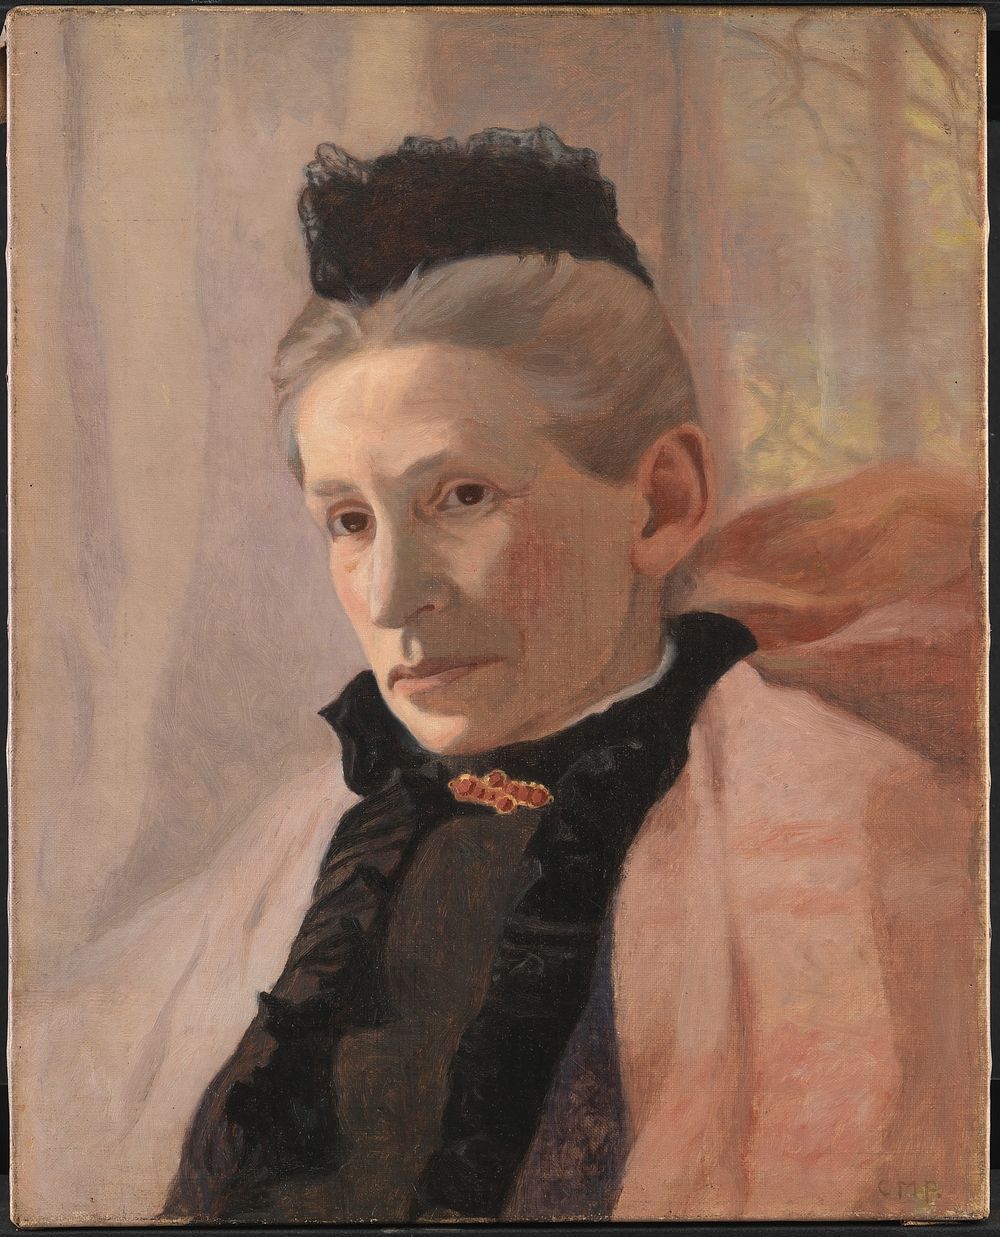 Frederikke von Scholten, F. Arendrup, the artist's mother-in-law by Christian Mourier Petersen